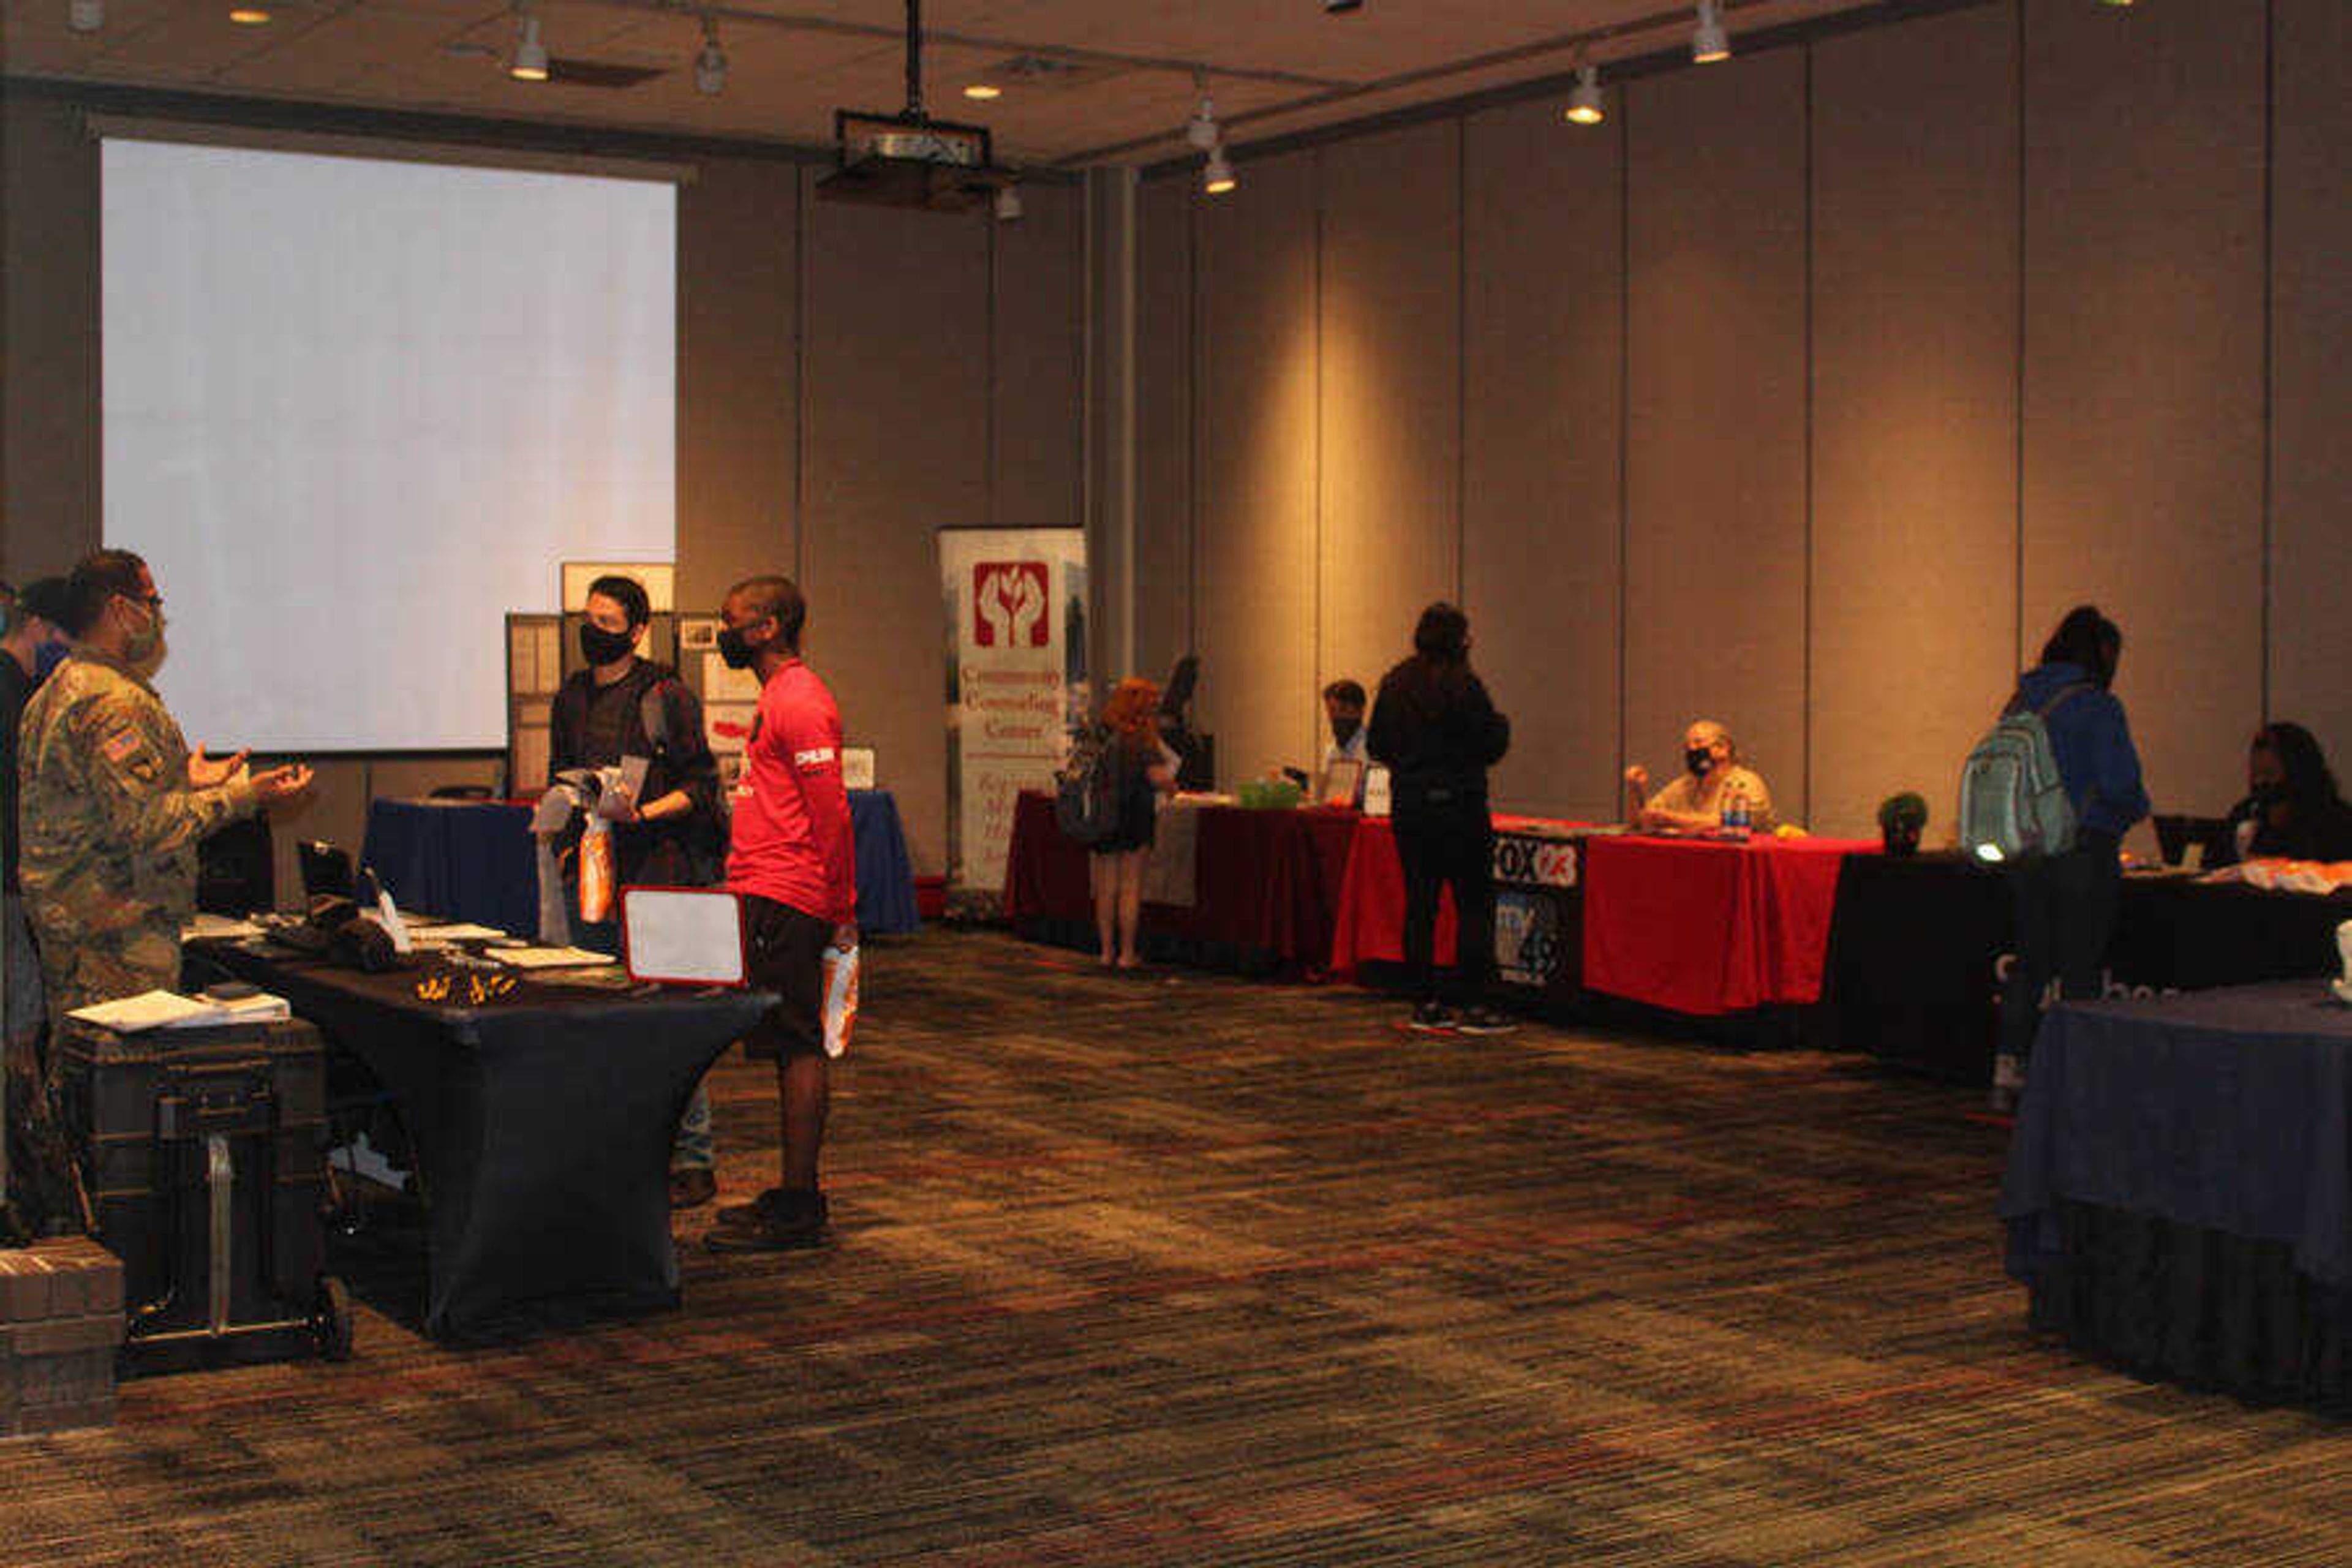 Southeast students meet with potential employers at the Southeast Job Expo in the University Center on Sept. 3, 2020. Members of Southeast’s Career Services greeted expo attendees as they arrived and provided information to students.